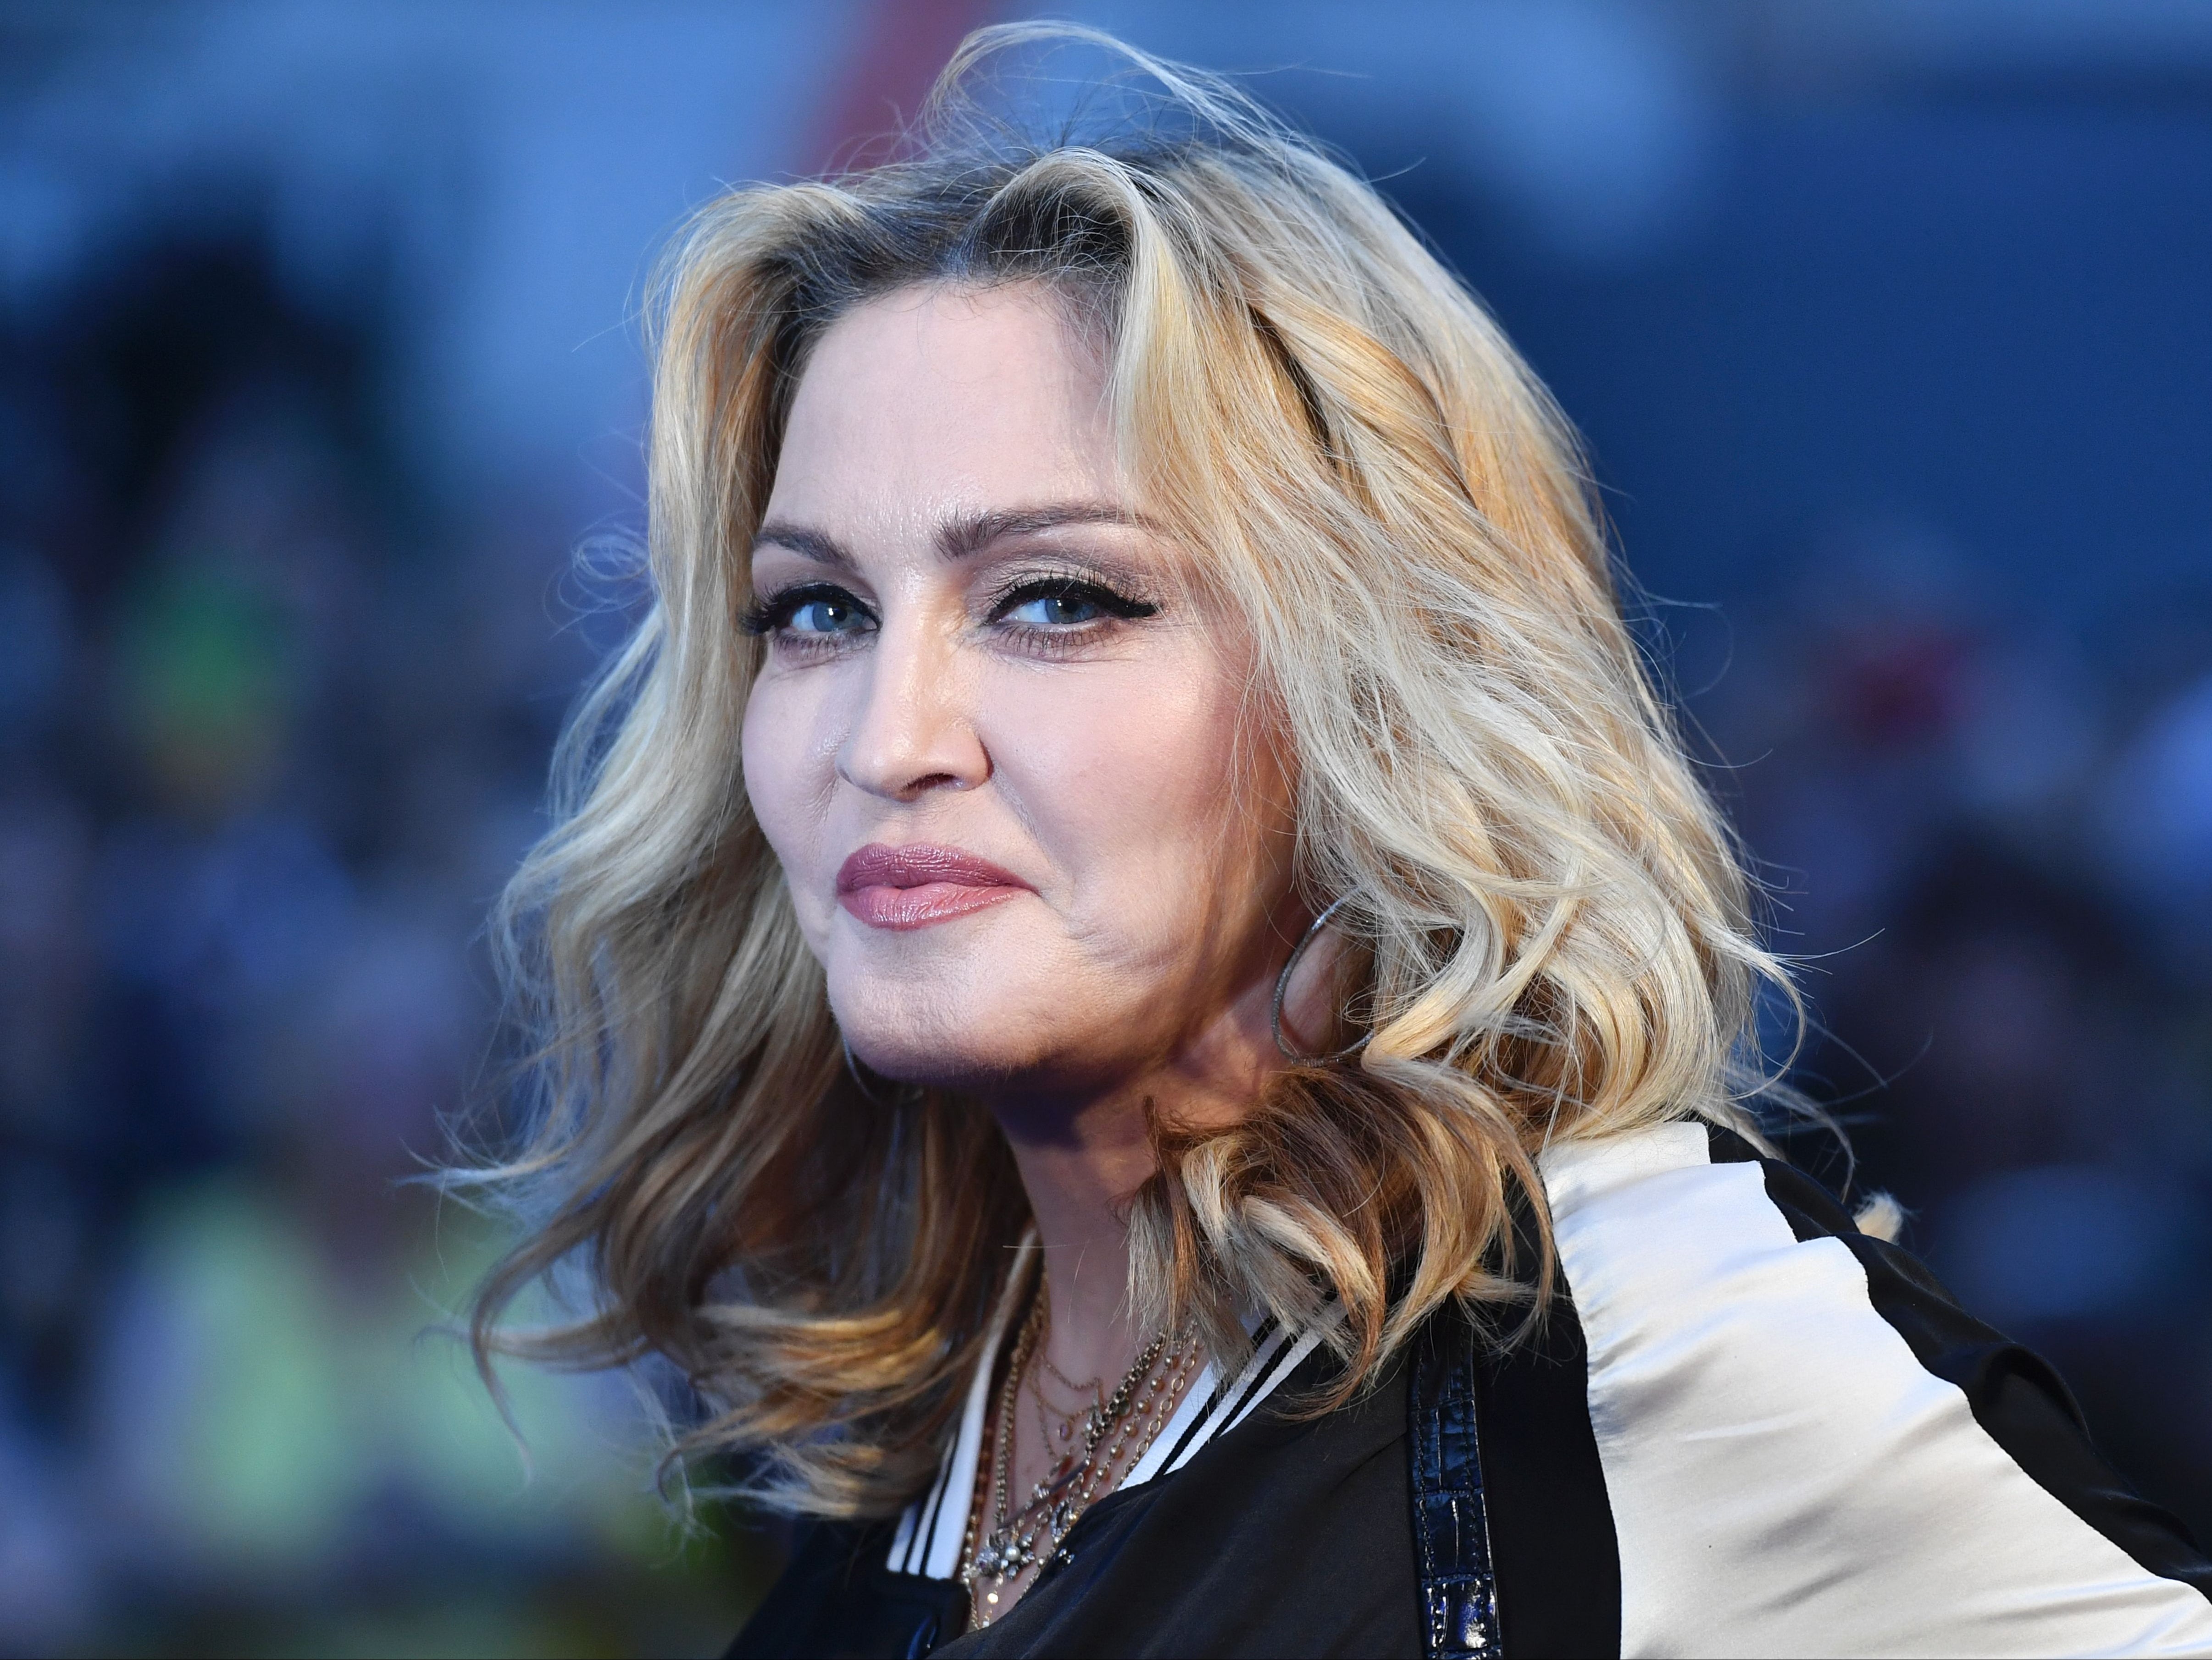 Madonna turned 64 on Tuesday 16 August